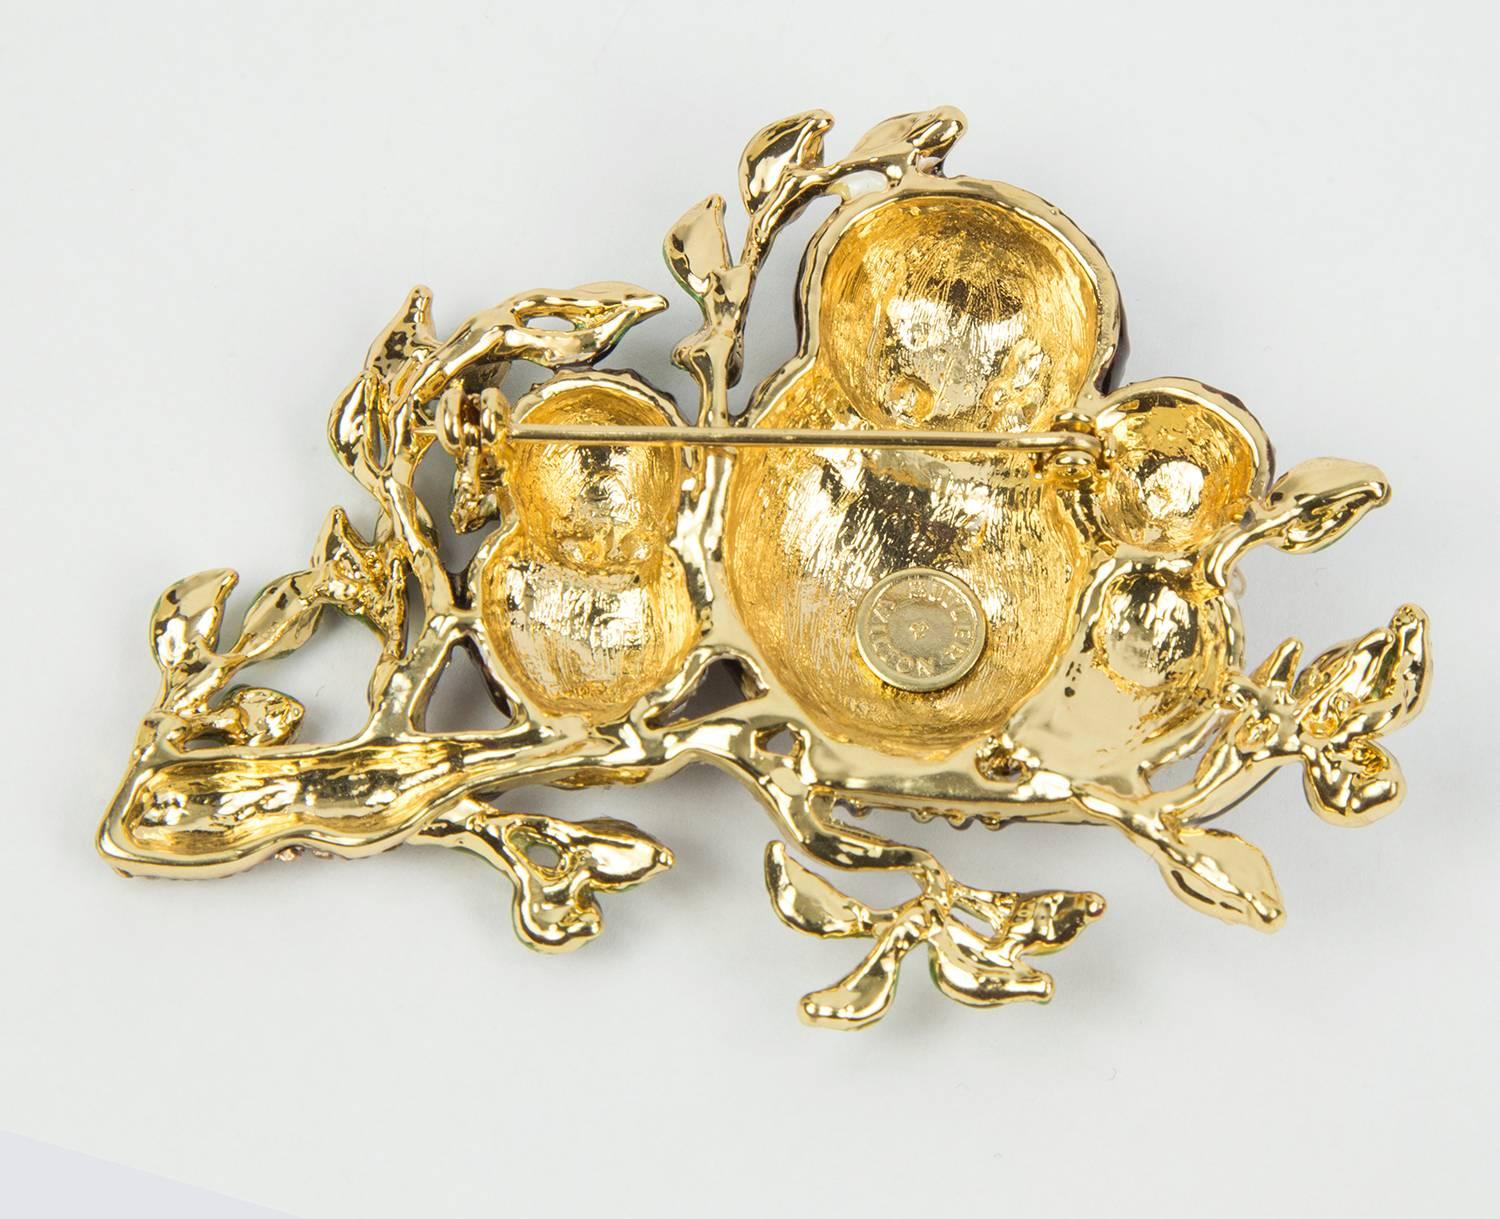 This striking brooch features a Mother Owl and her Babies on a Branch, set with a multitude of glittering crystals and enamel enhancement;  Add sparkling impact to a coat, jacket or even bag with this bold design by Butler and Wilson!
